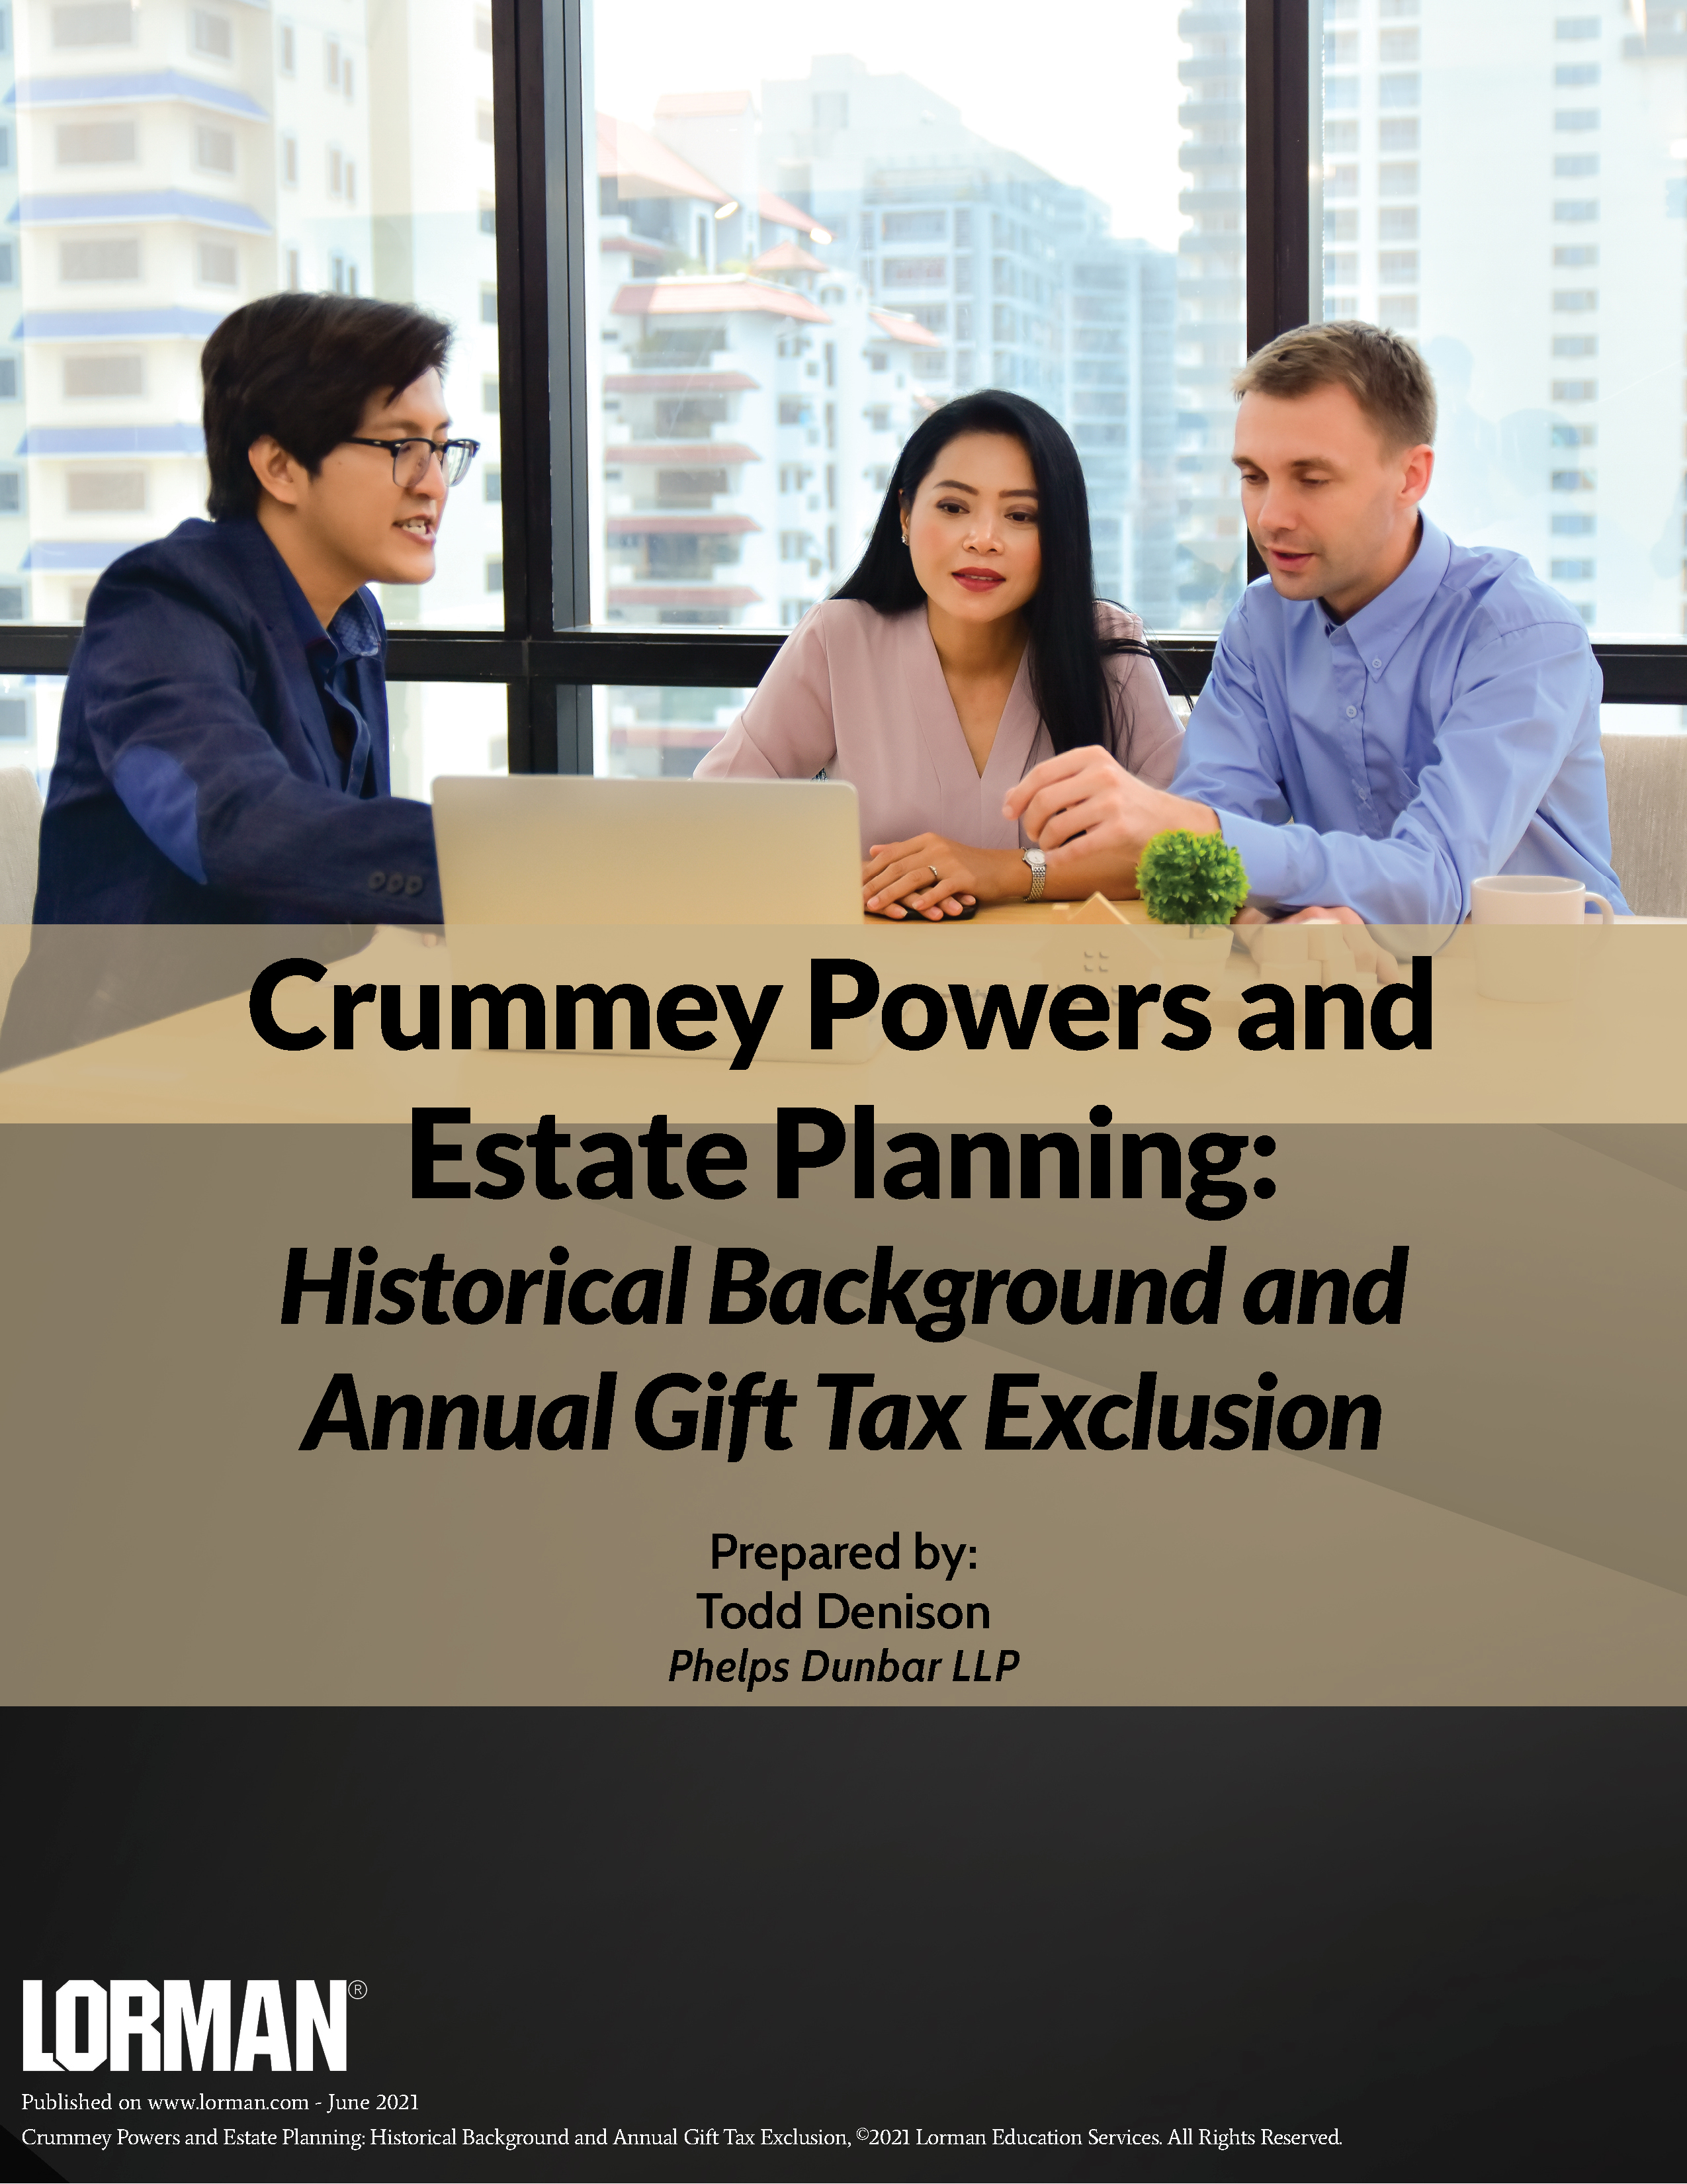 Crummey Powers and Estate Planning: Historical Background and Annual Gift Tax Exclusion